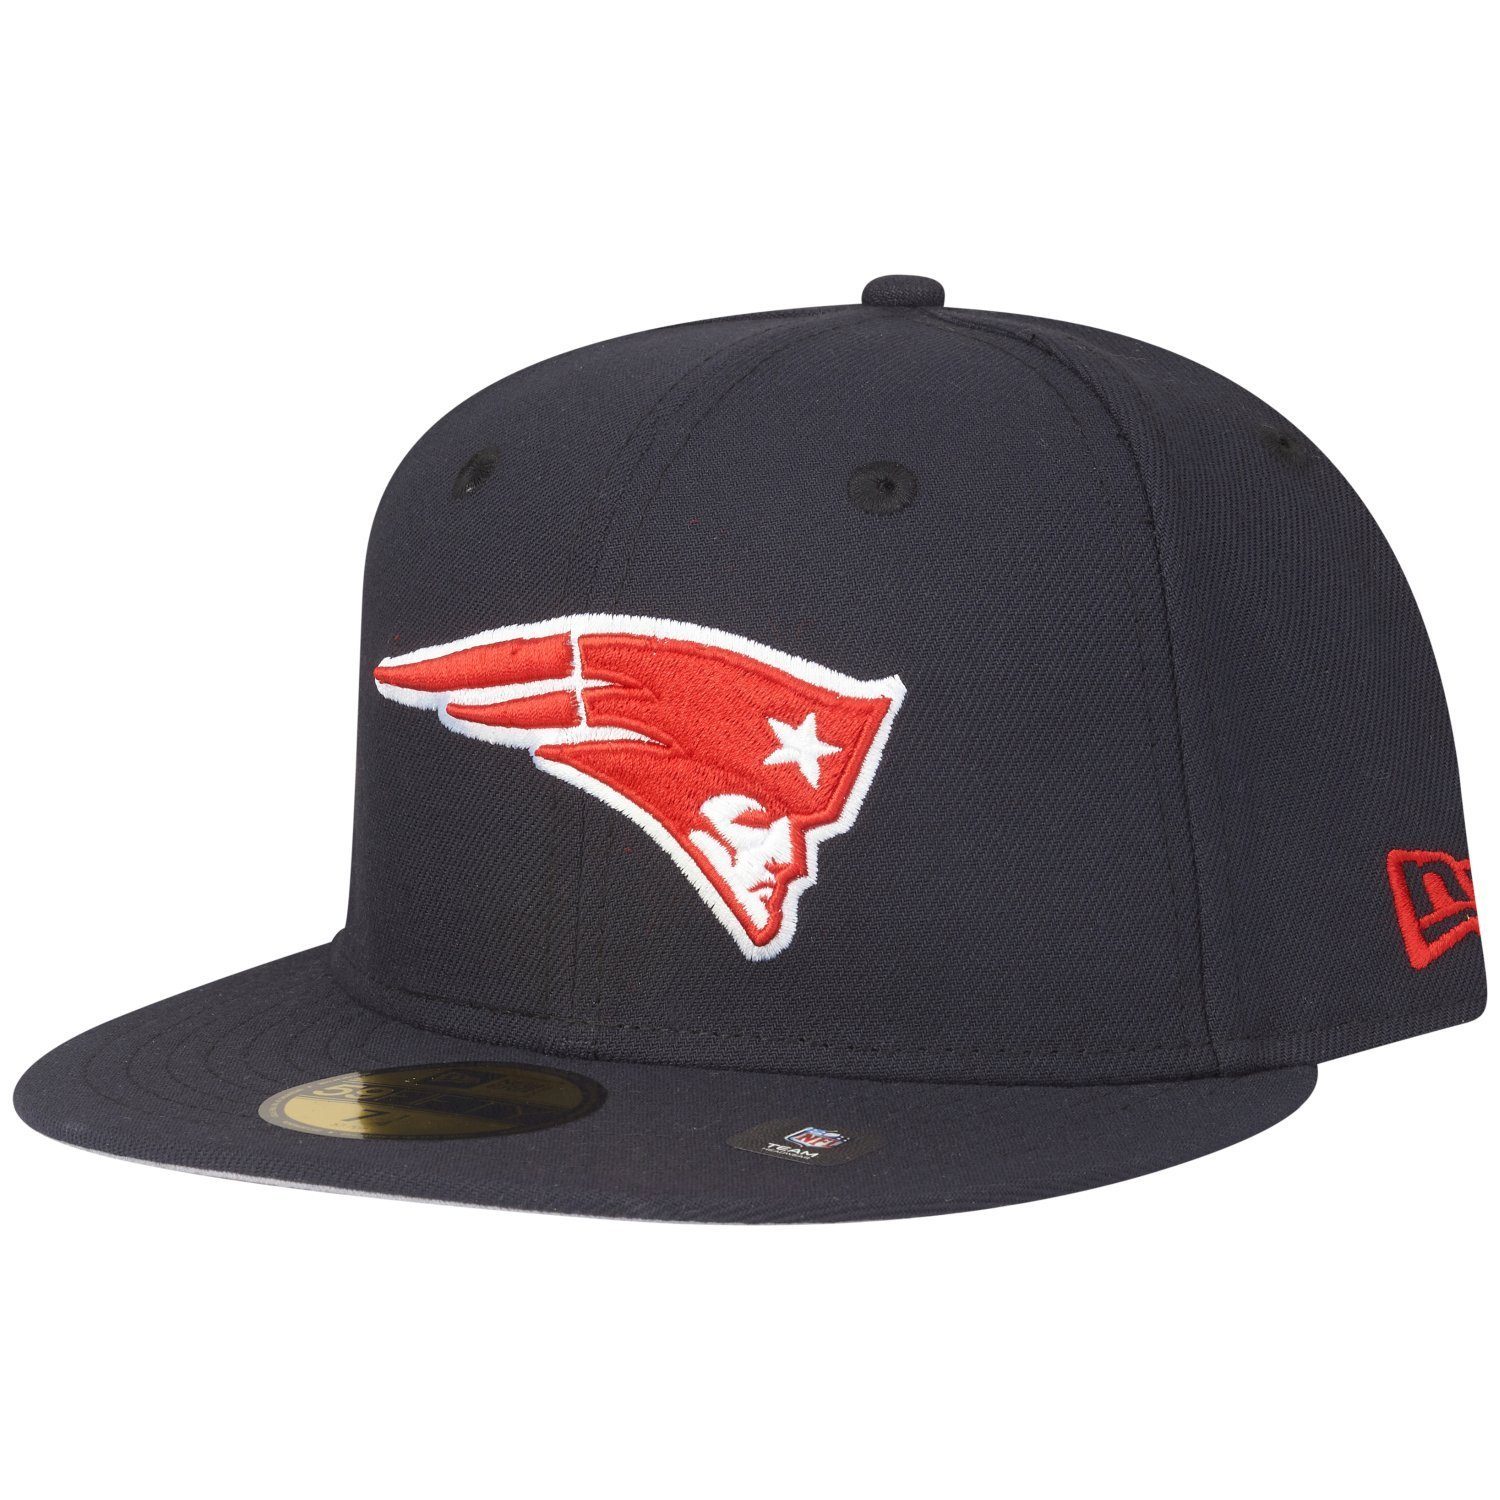 New Cap red TEAMS New Fitted England Patriots 59Fifty Era NFL